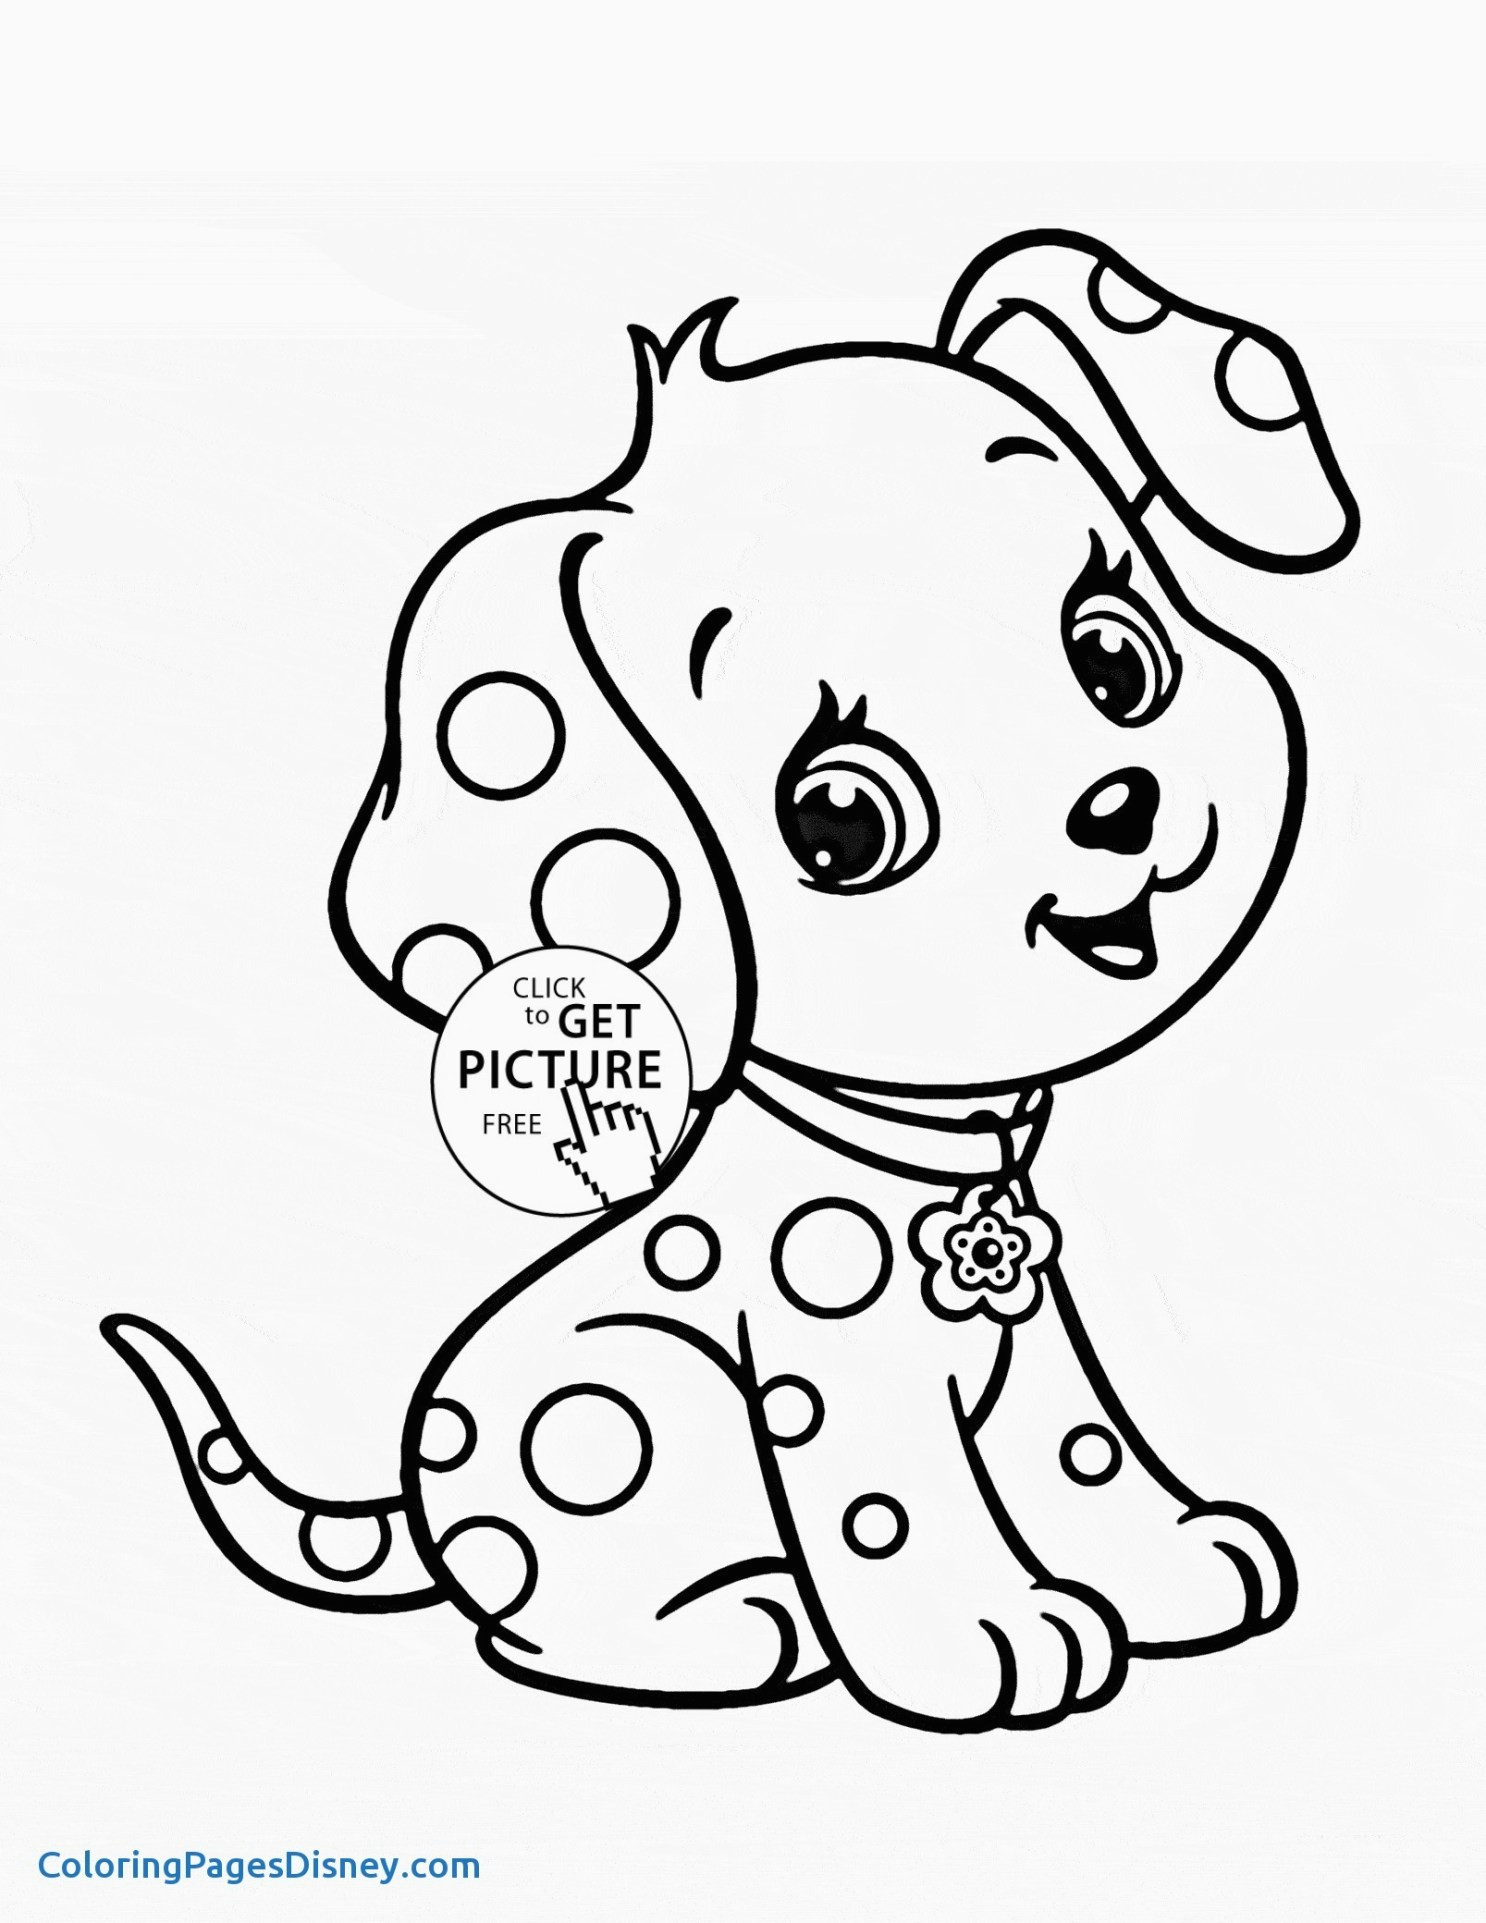 Drawing Dogs Photo A Luxury How to Draw A Cartoon Dog